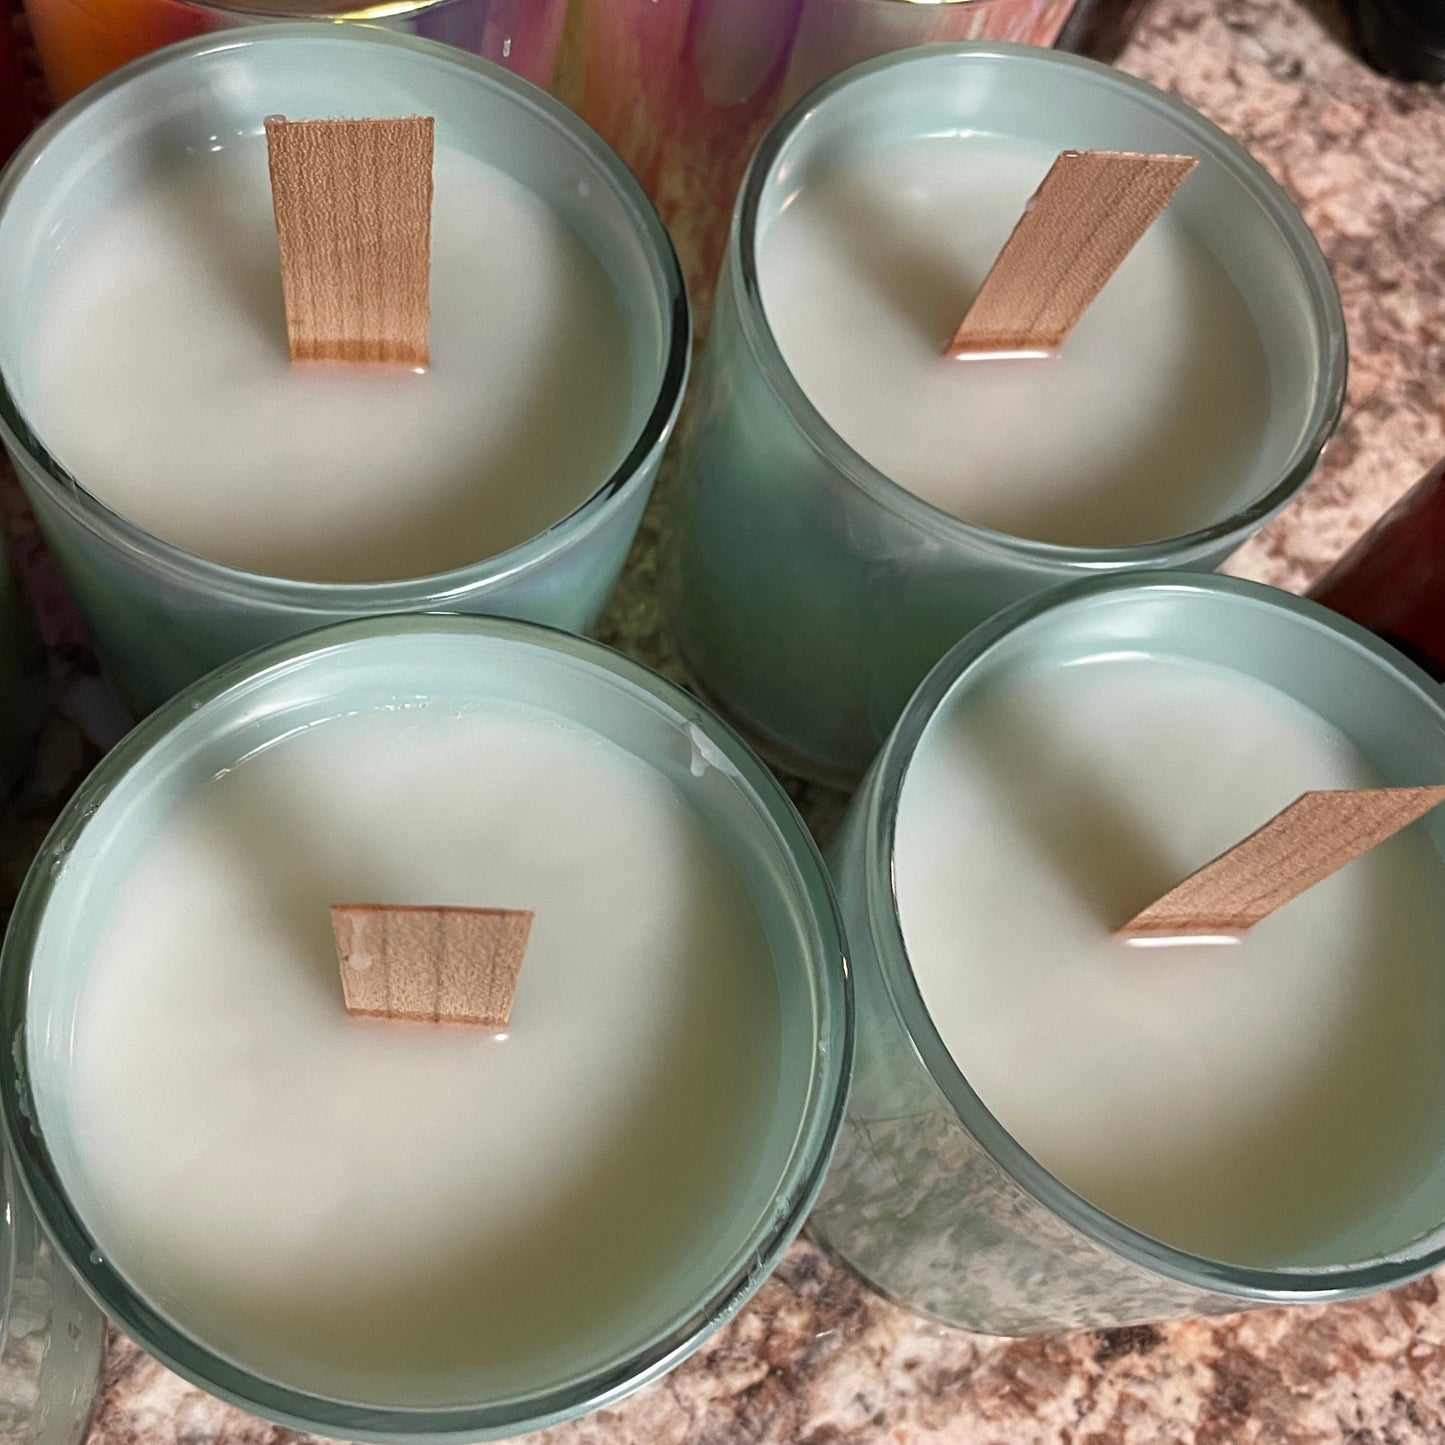 Endless Weekend Type Candle made with Coco apricot creme wax and a crackling wooden wick